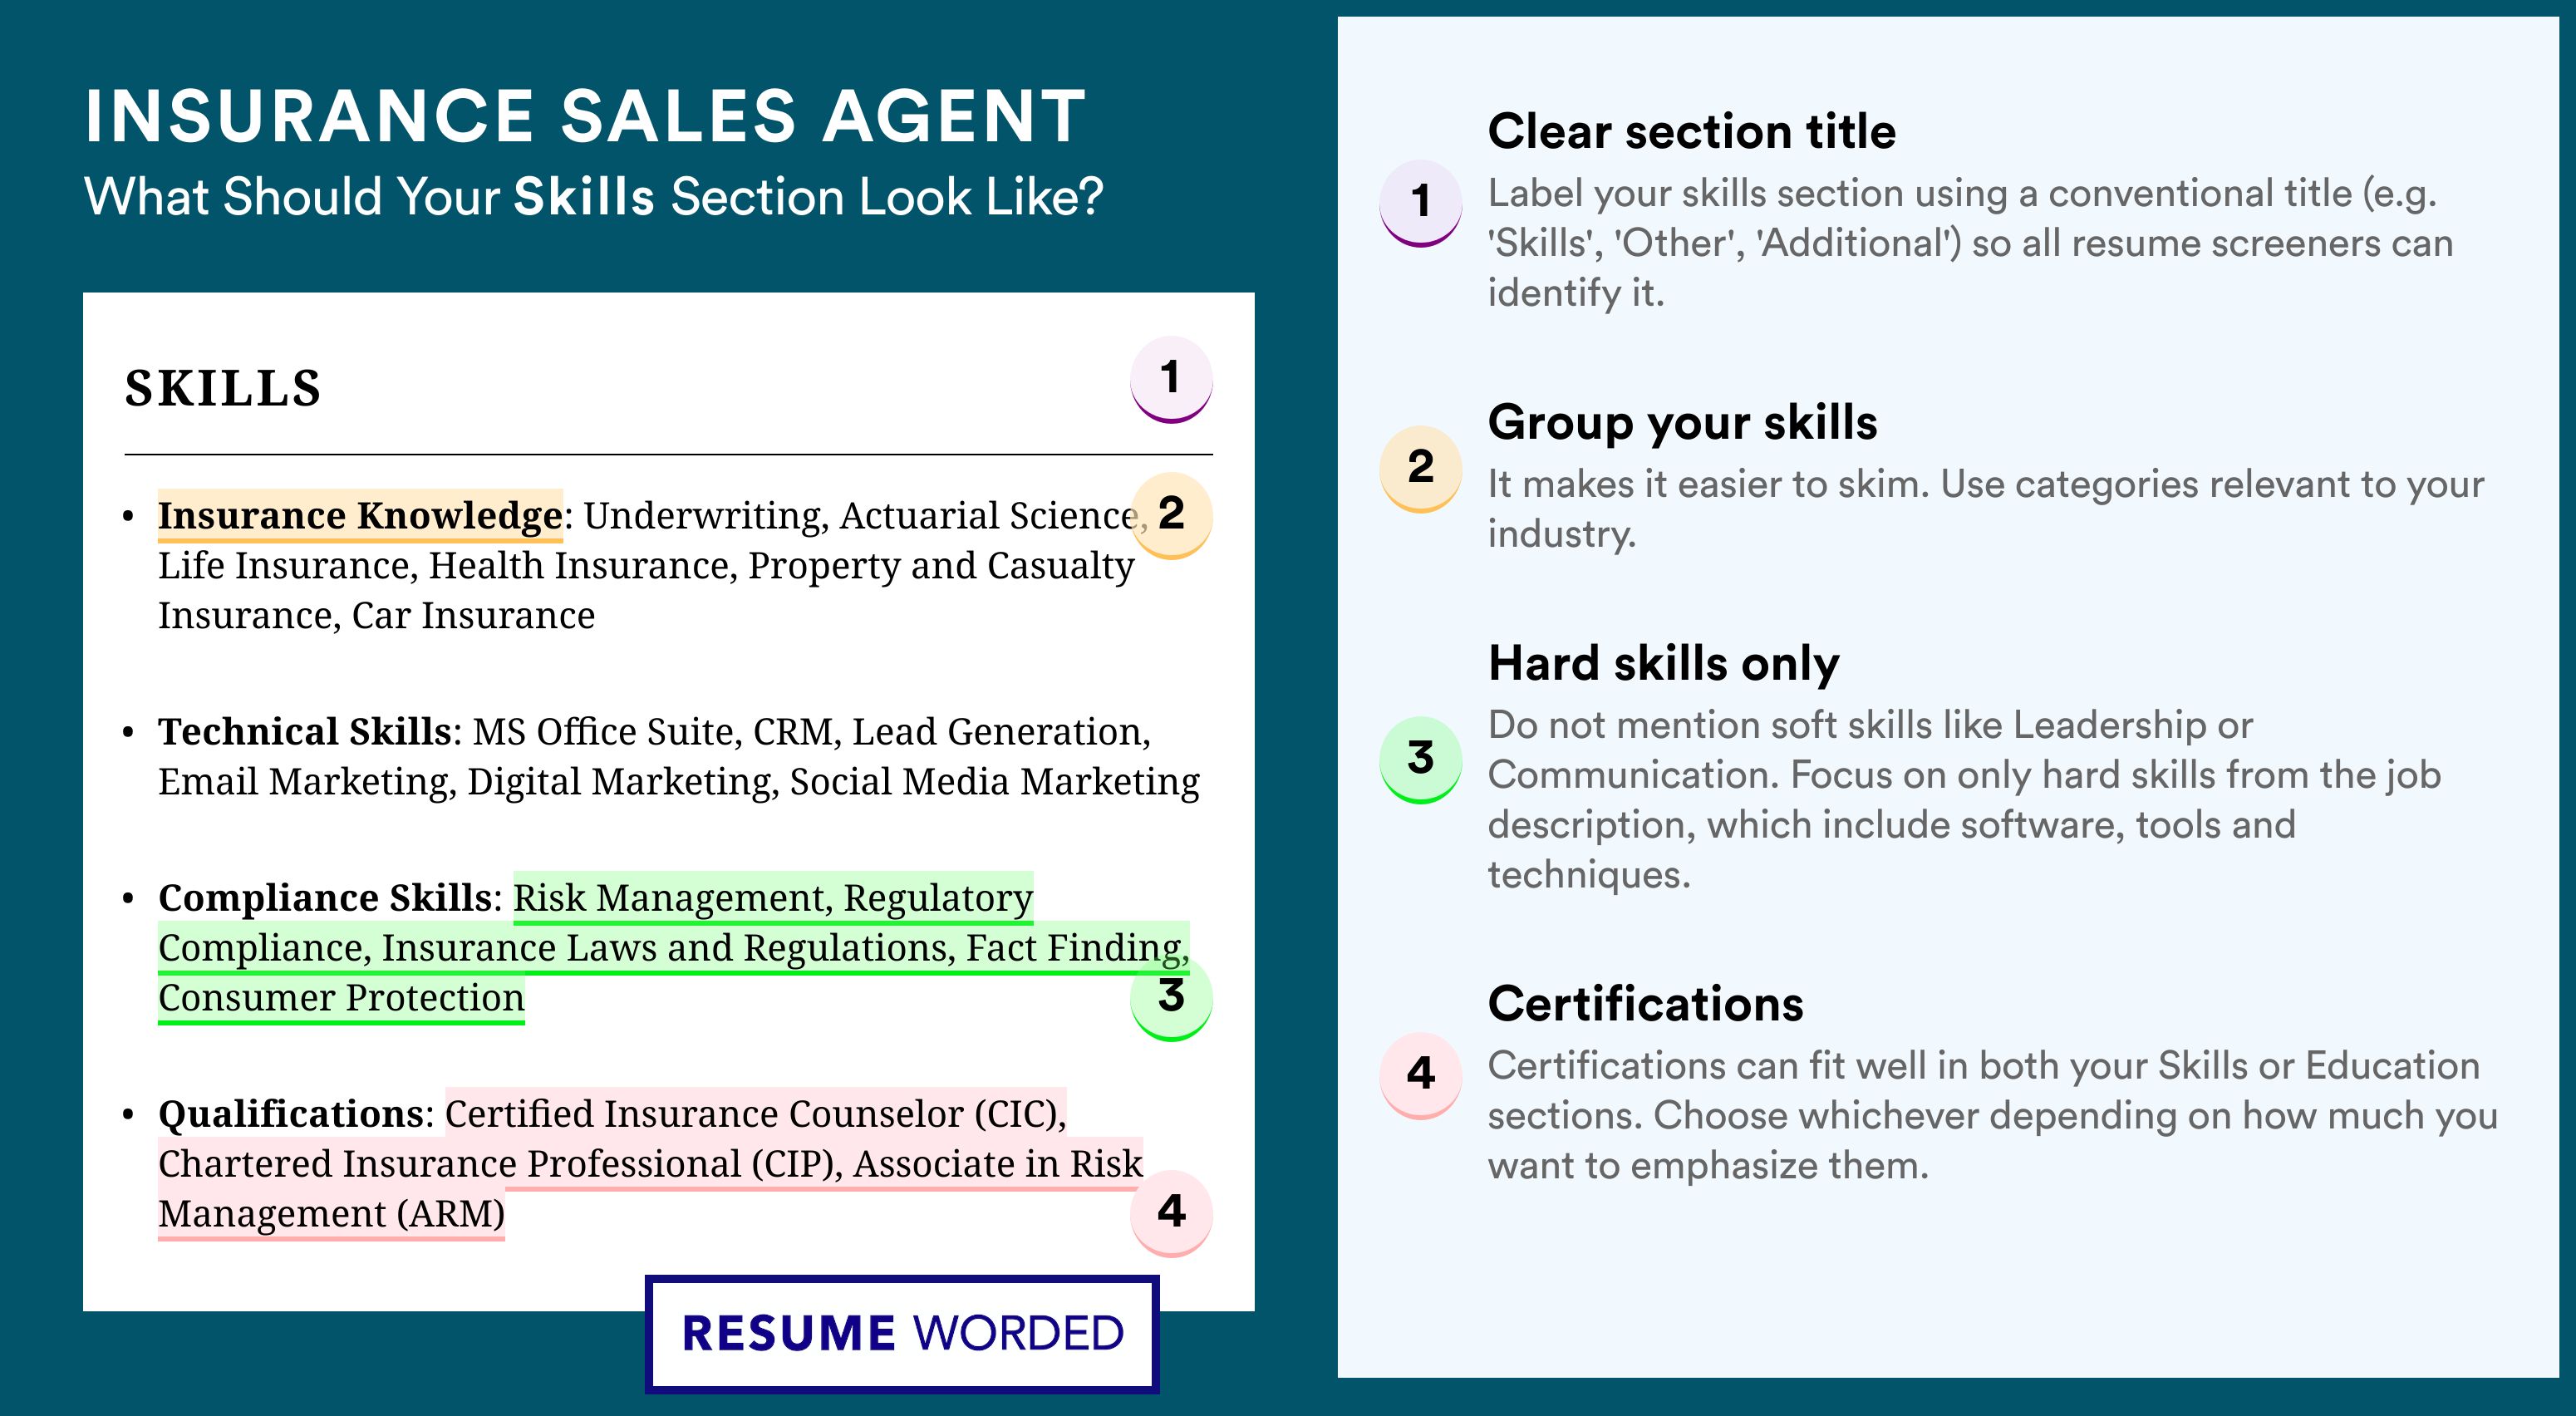 How To Write Your Skills Section - Insurance Sales Agent Roles